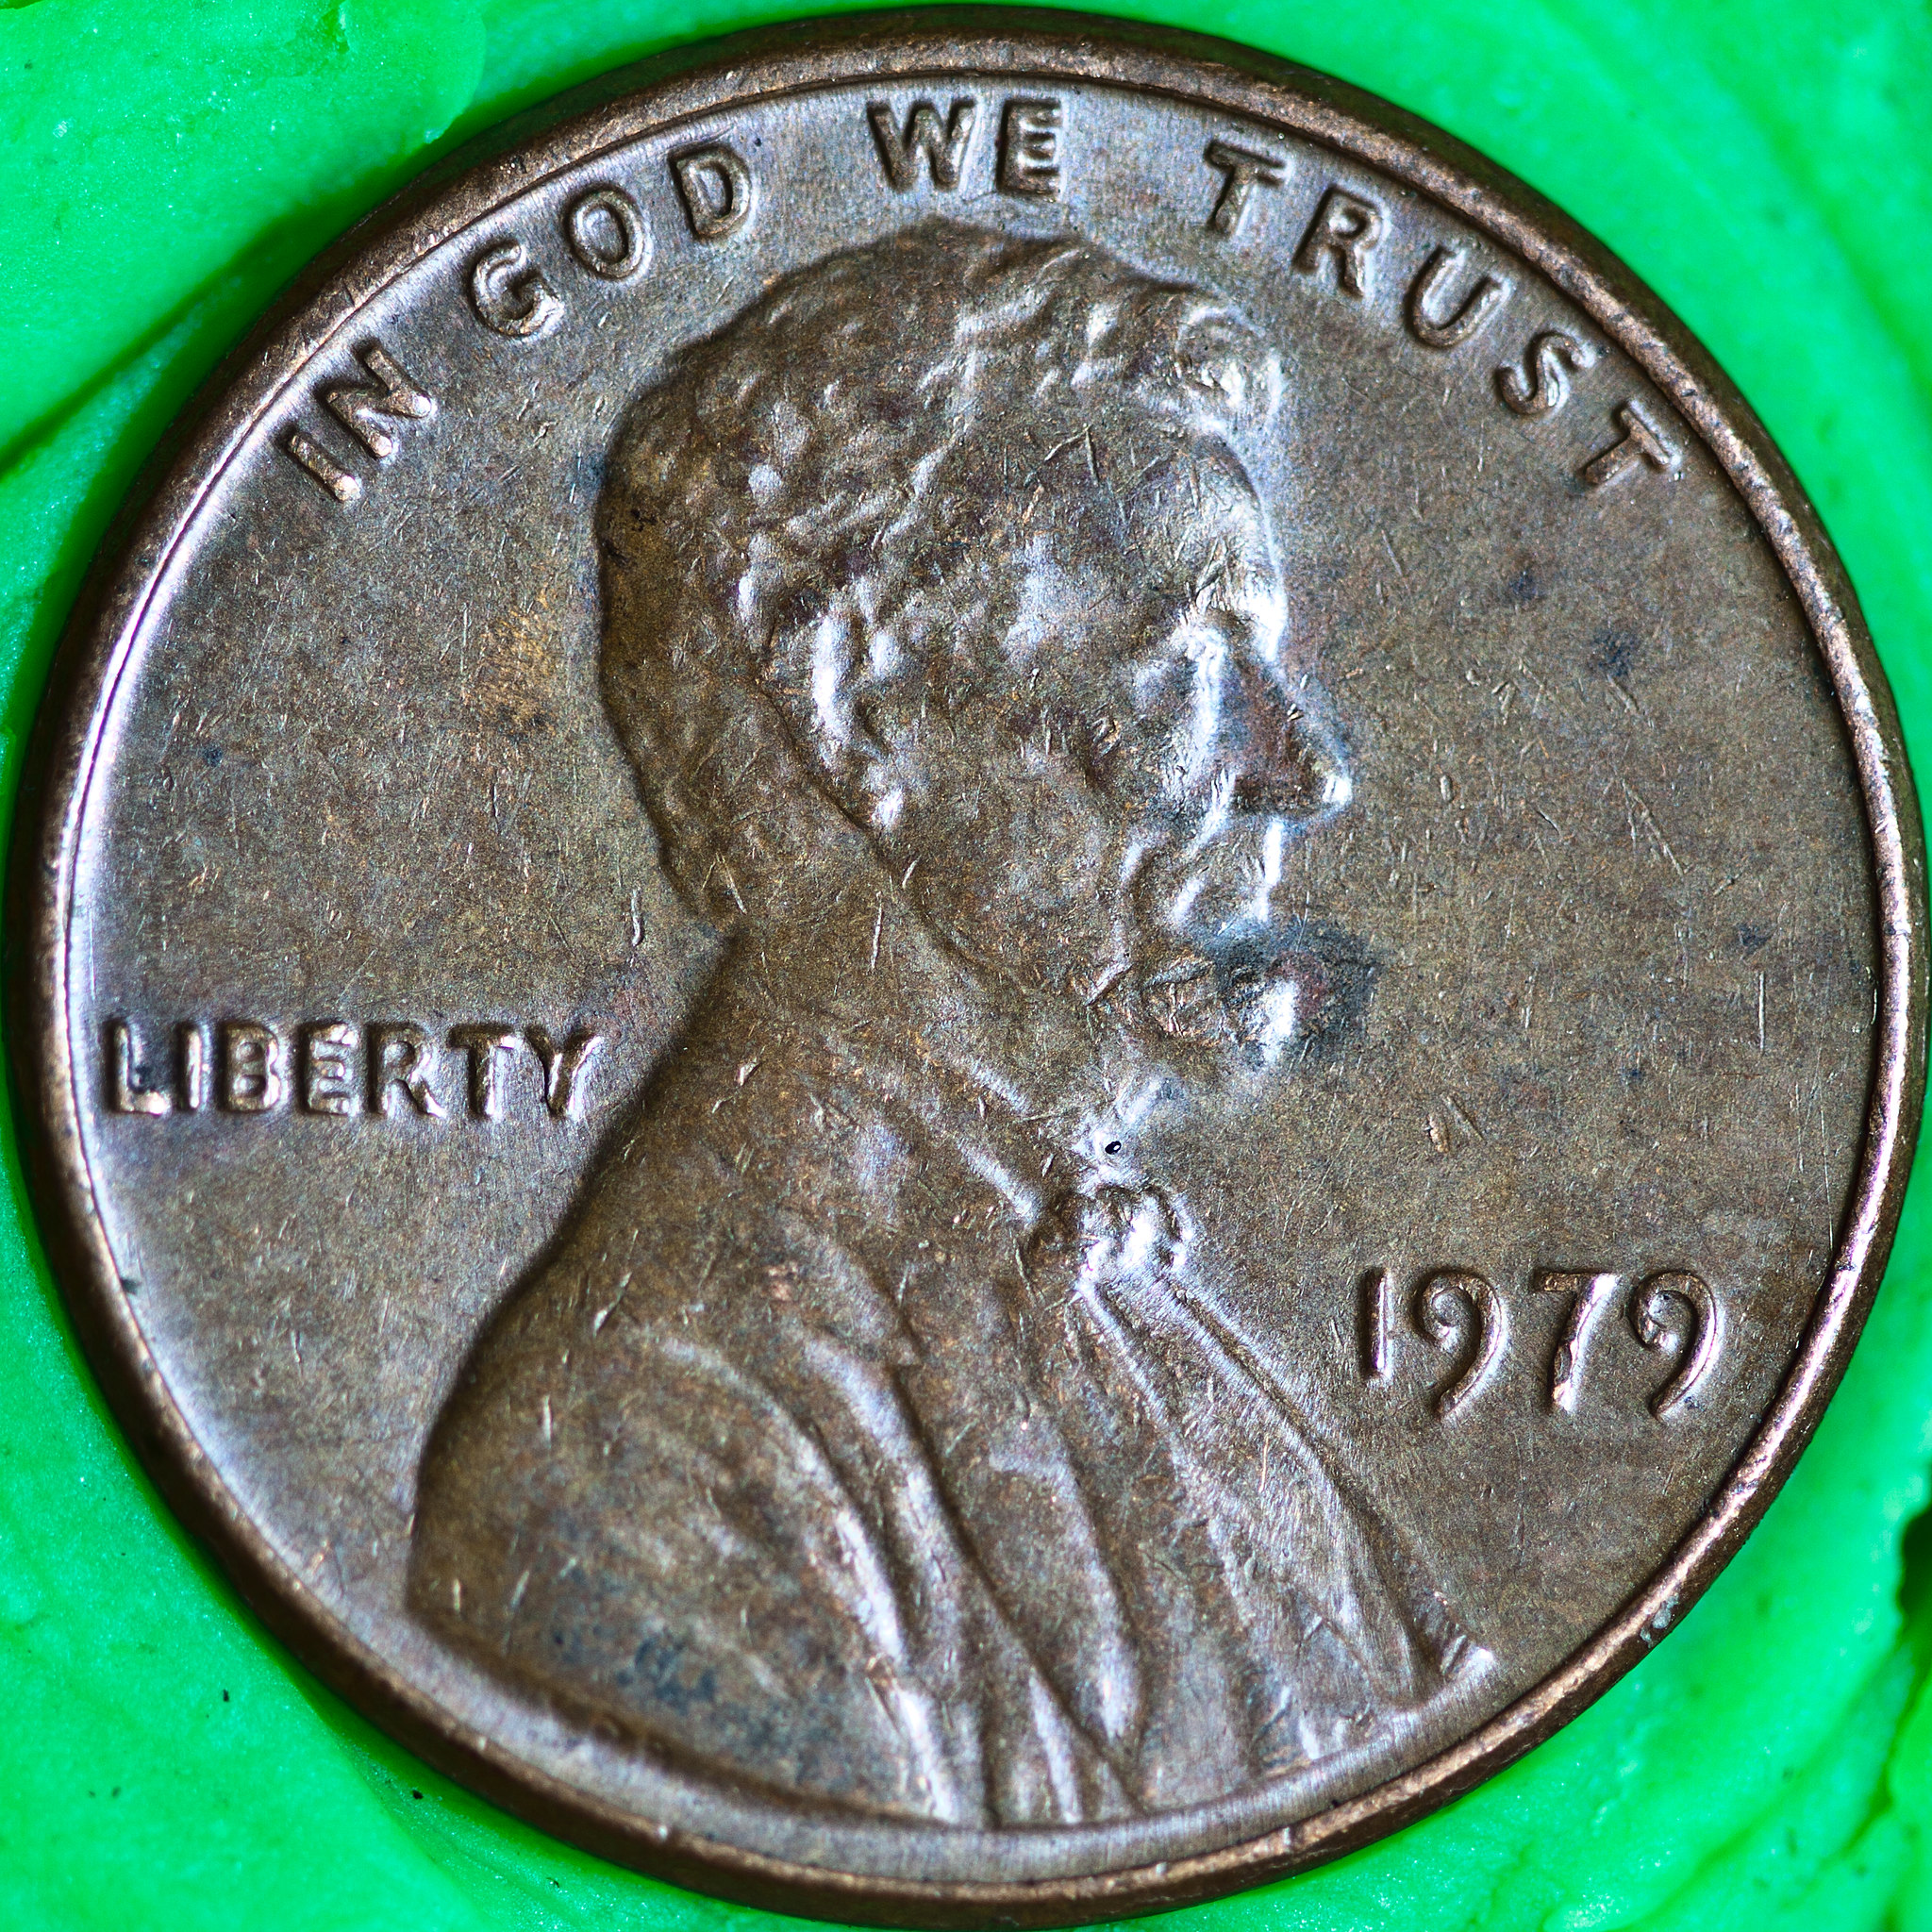 Some 1979 pennies are worth more than $10,000!